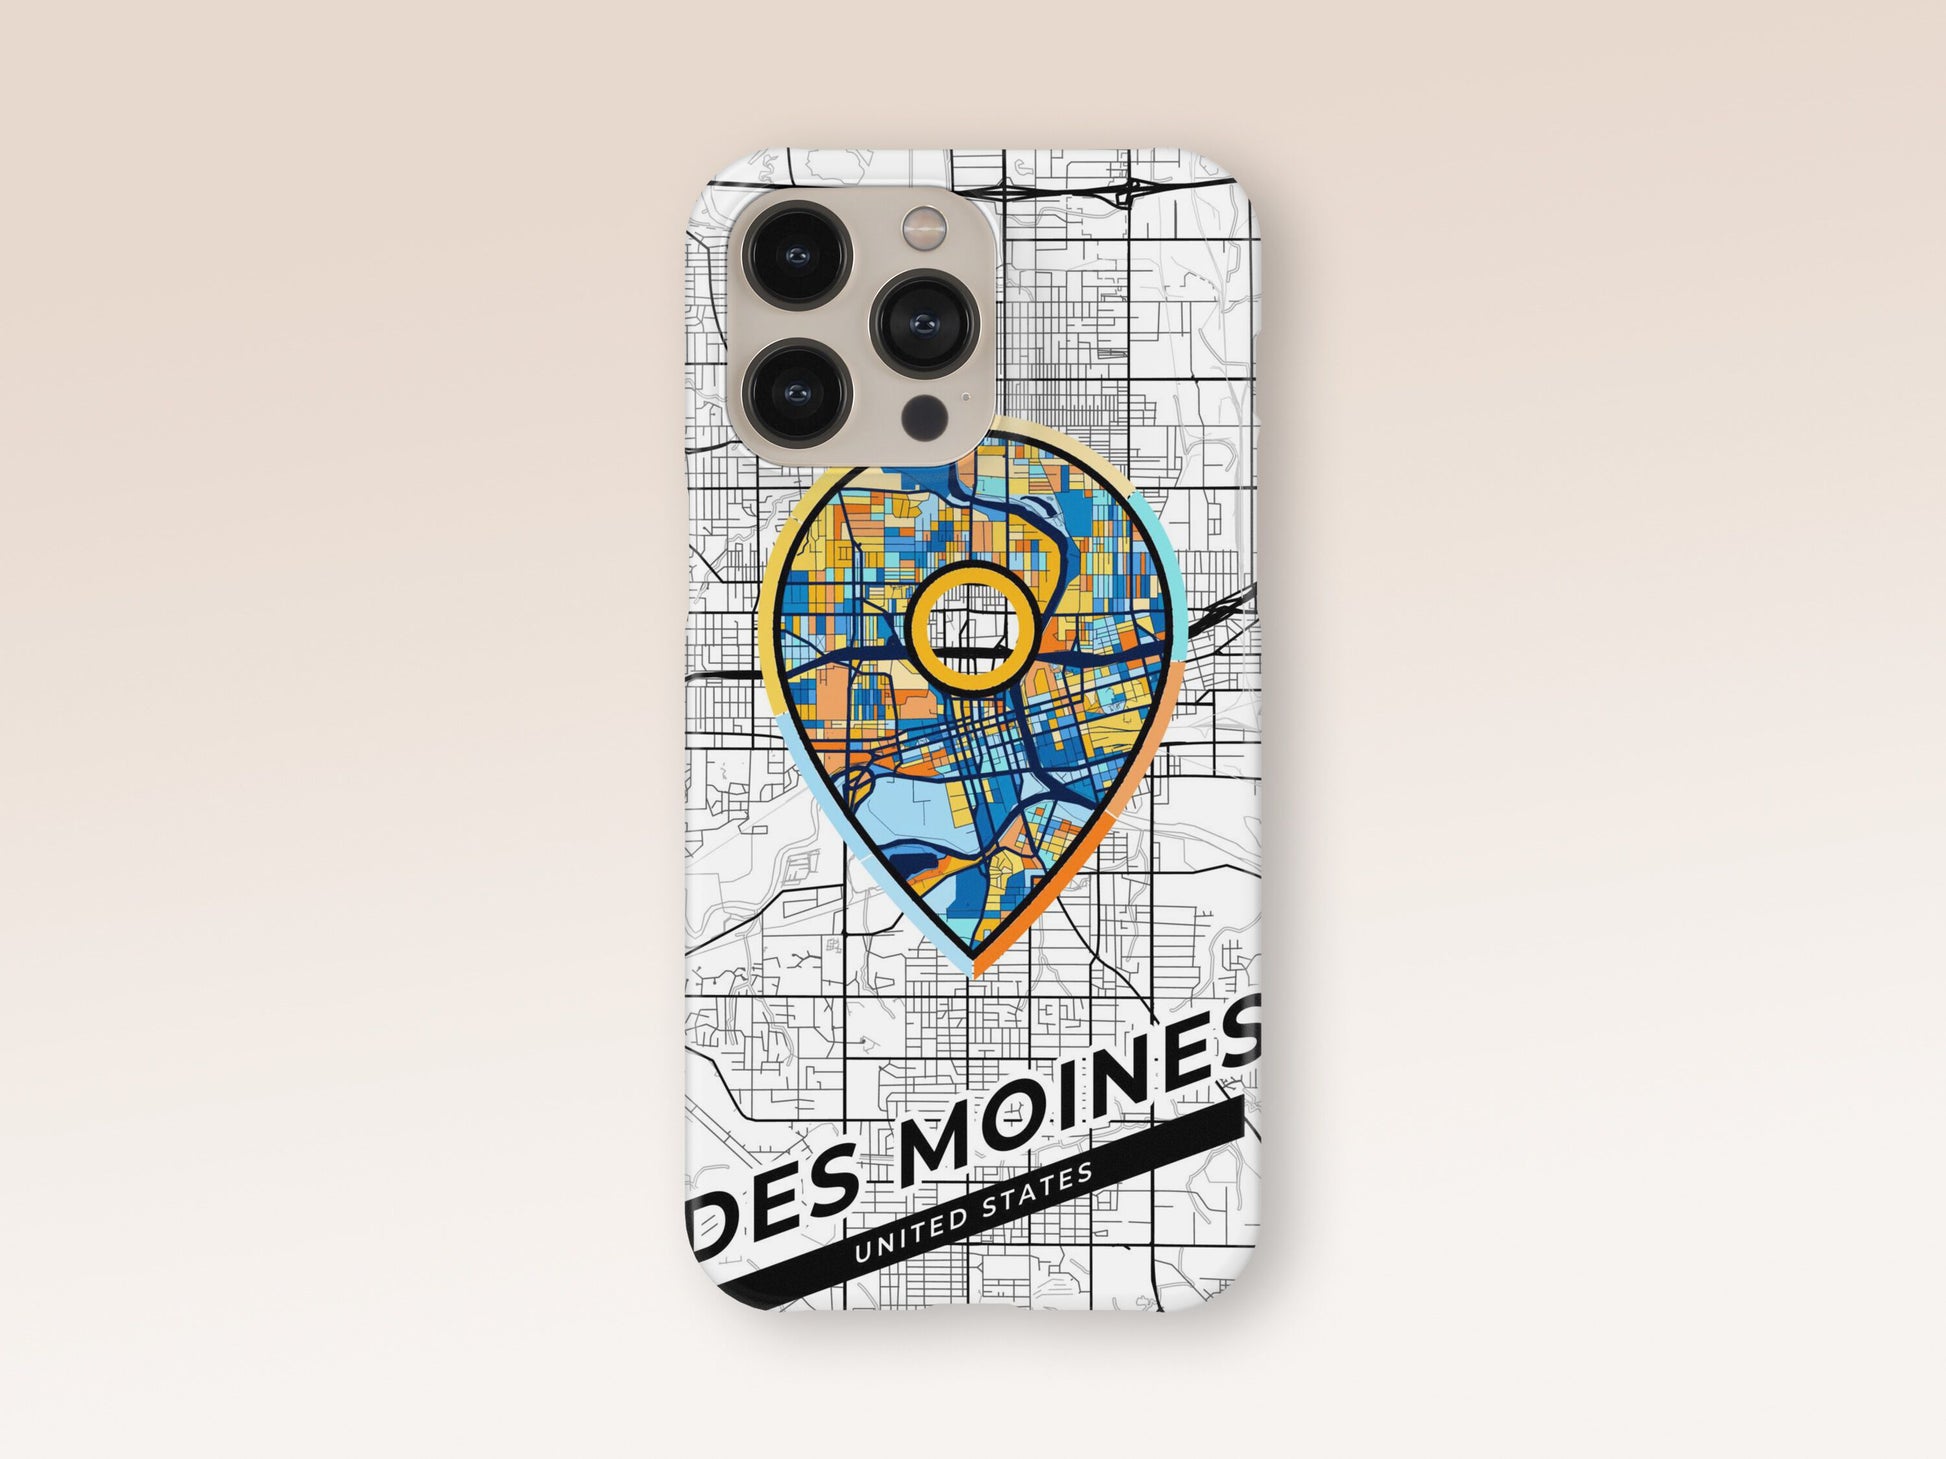 Des Moines Iowa slim phone case with colorful icon. Birthday, wedding or housewarming gift. Couple match cases. 1